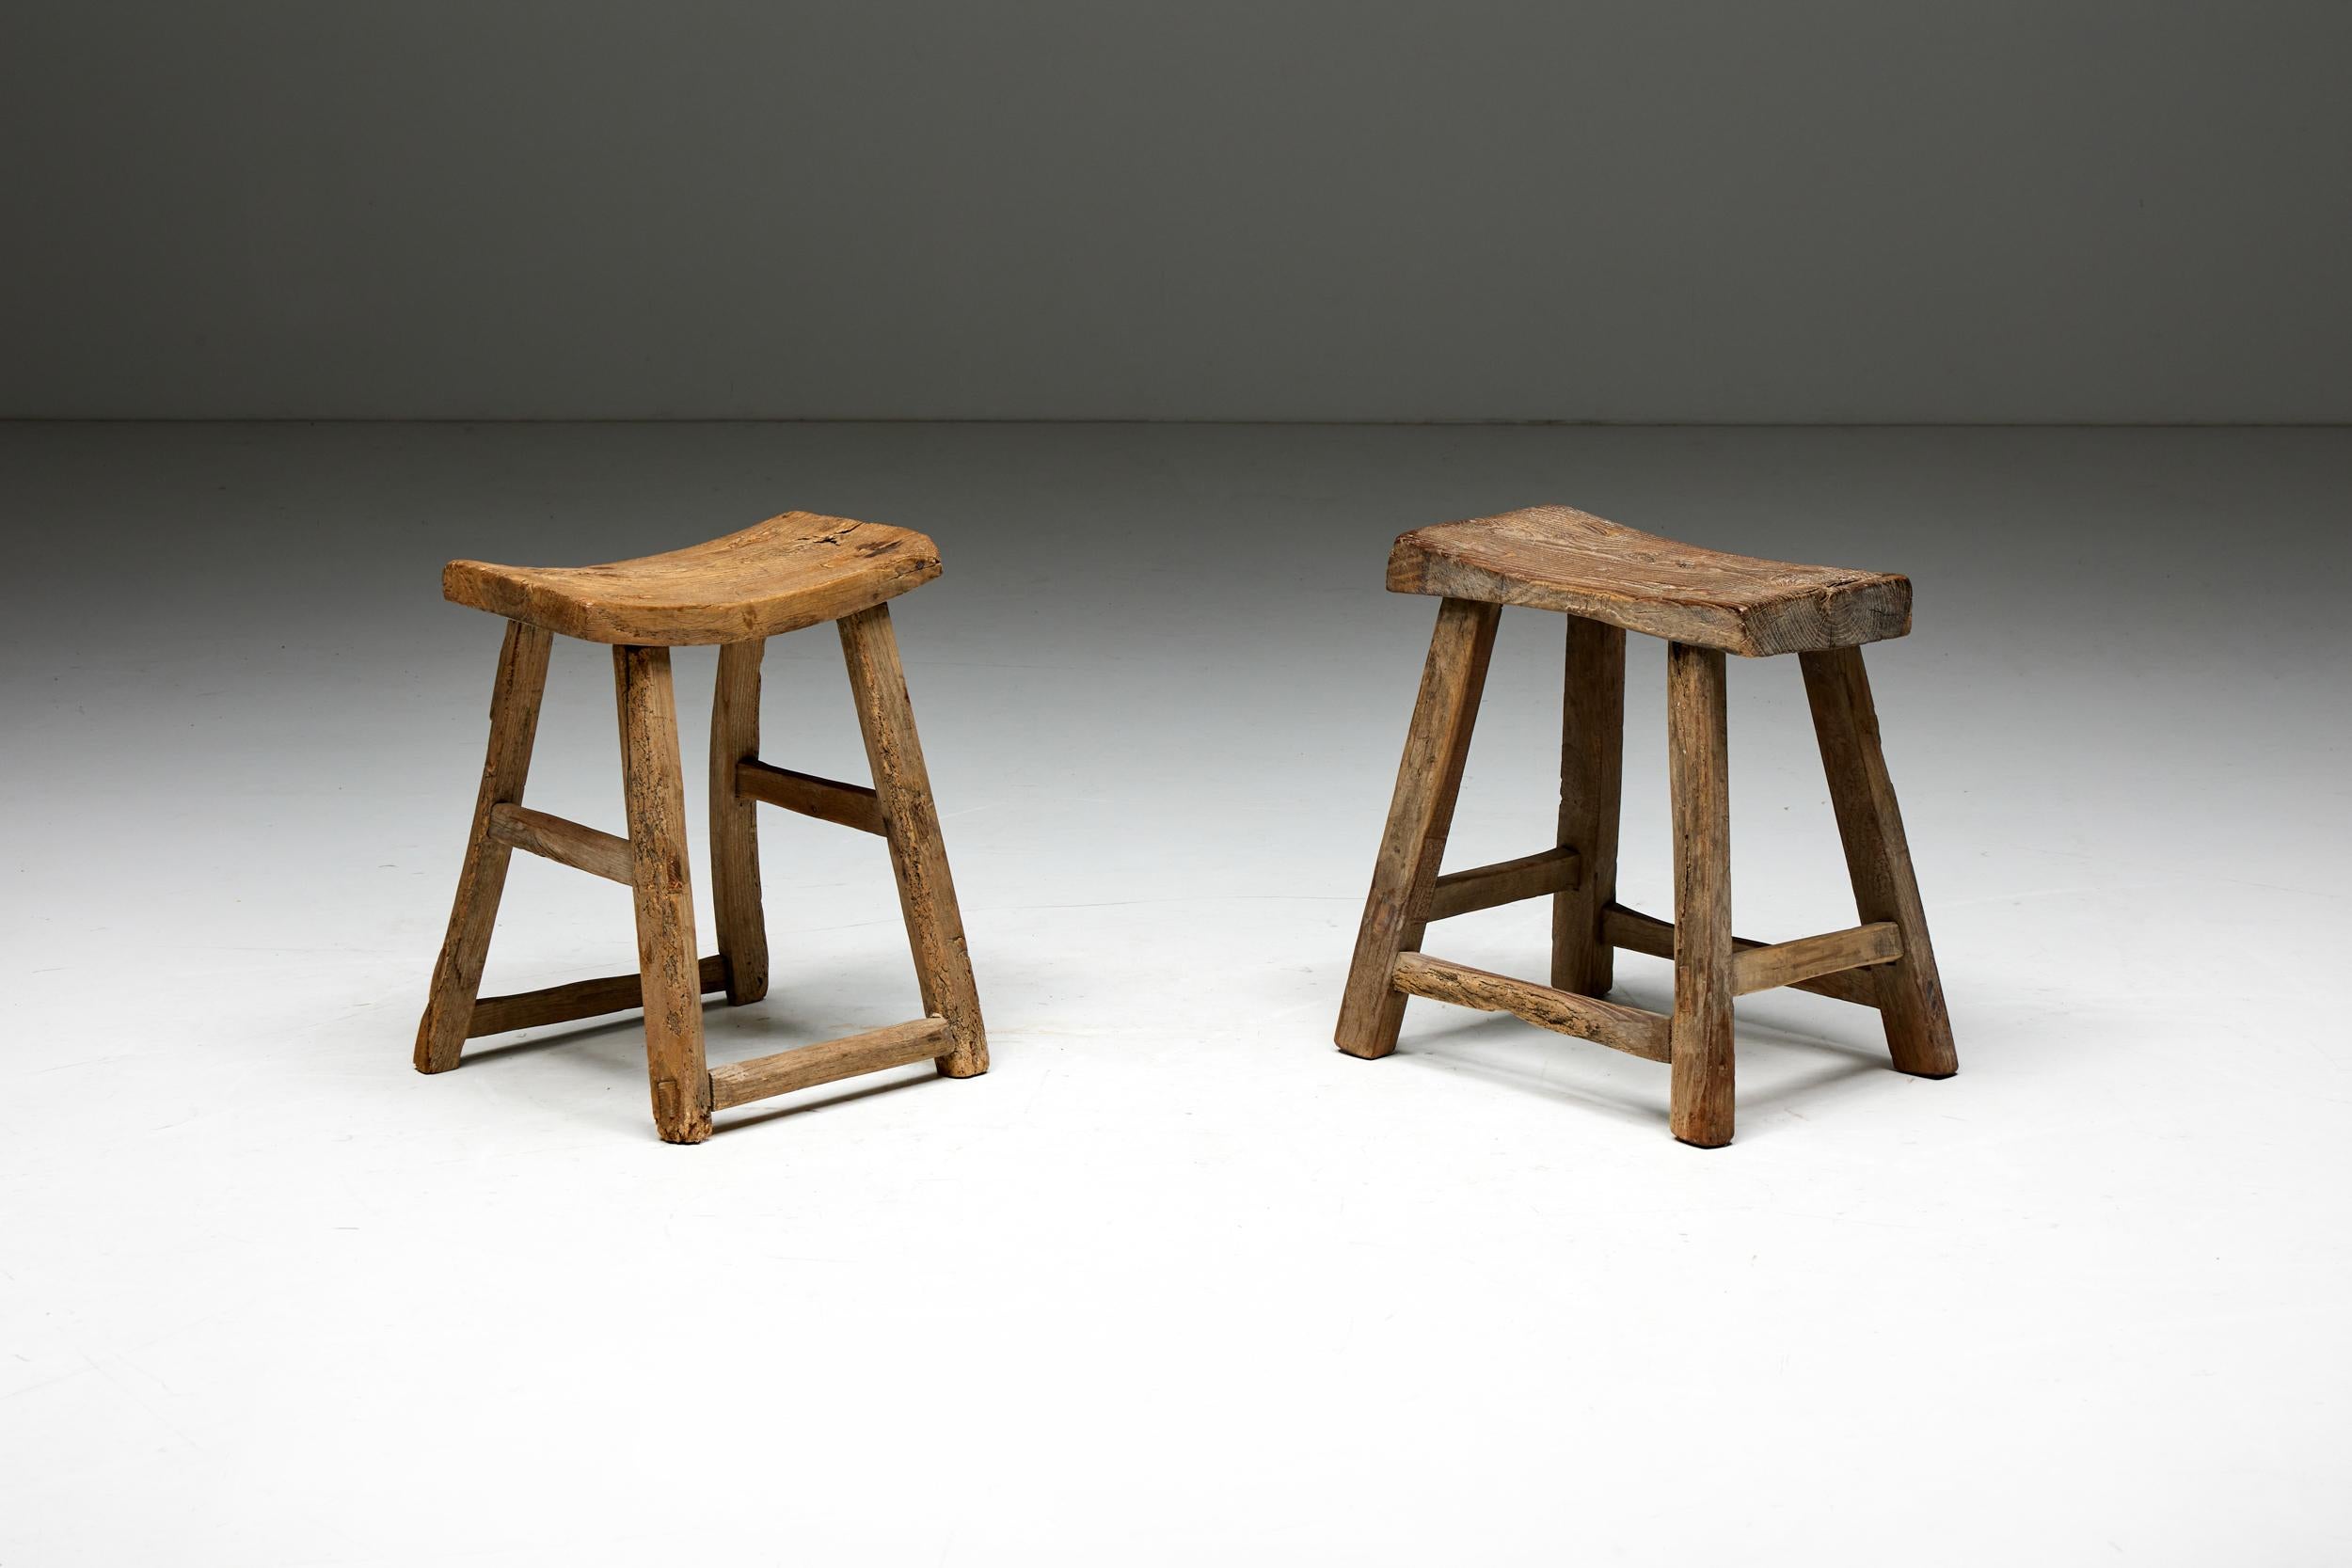 Rustic Travail Populaire Stool, France, Early 20th Century For Sale 5